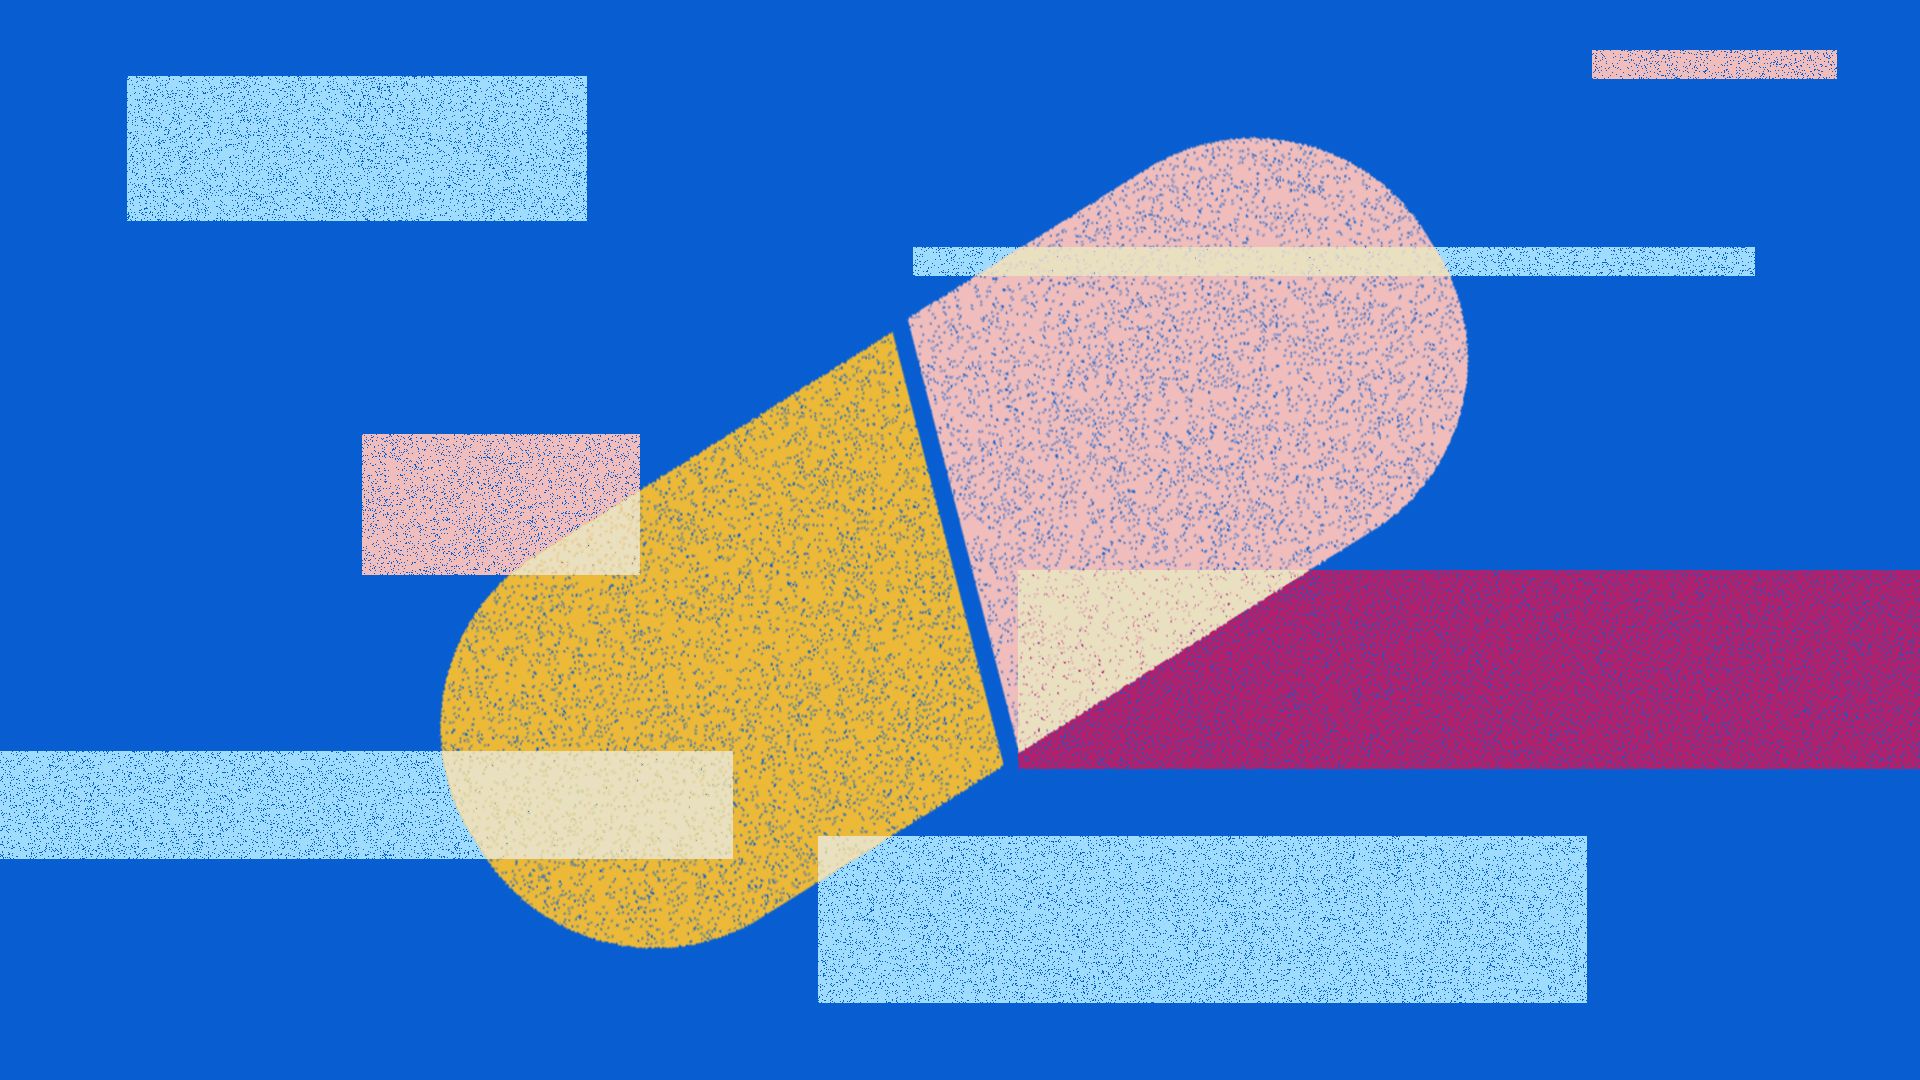 Illustration of pill with blocks of color across it